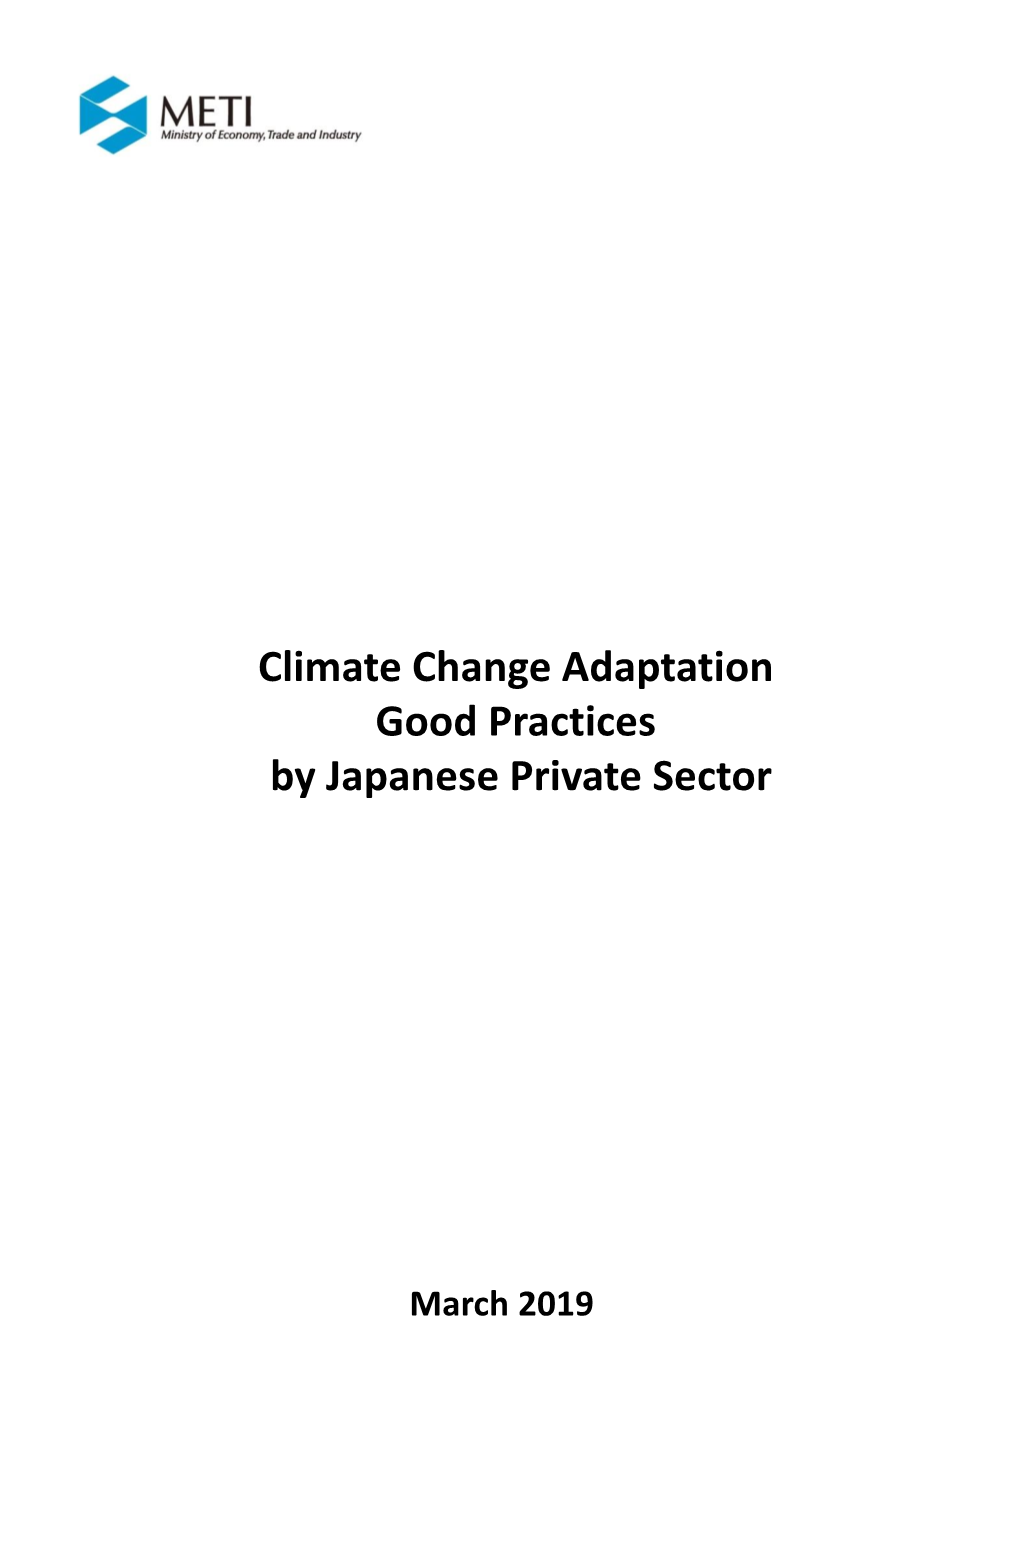 Climate Change Adaptation Good Practices by Japanese Private Sector